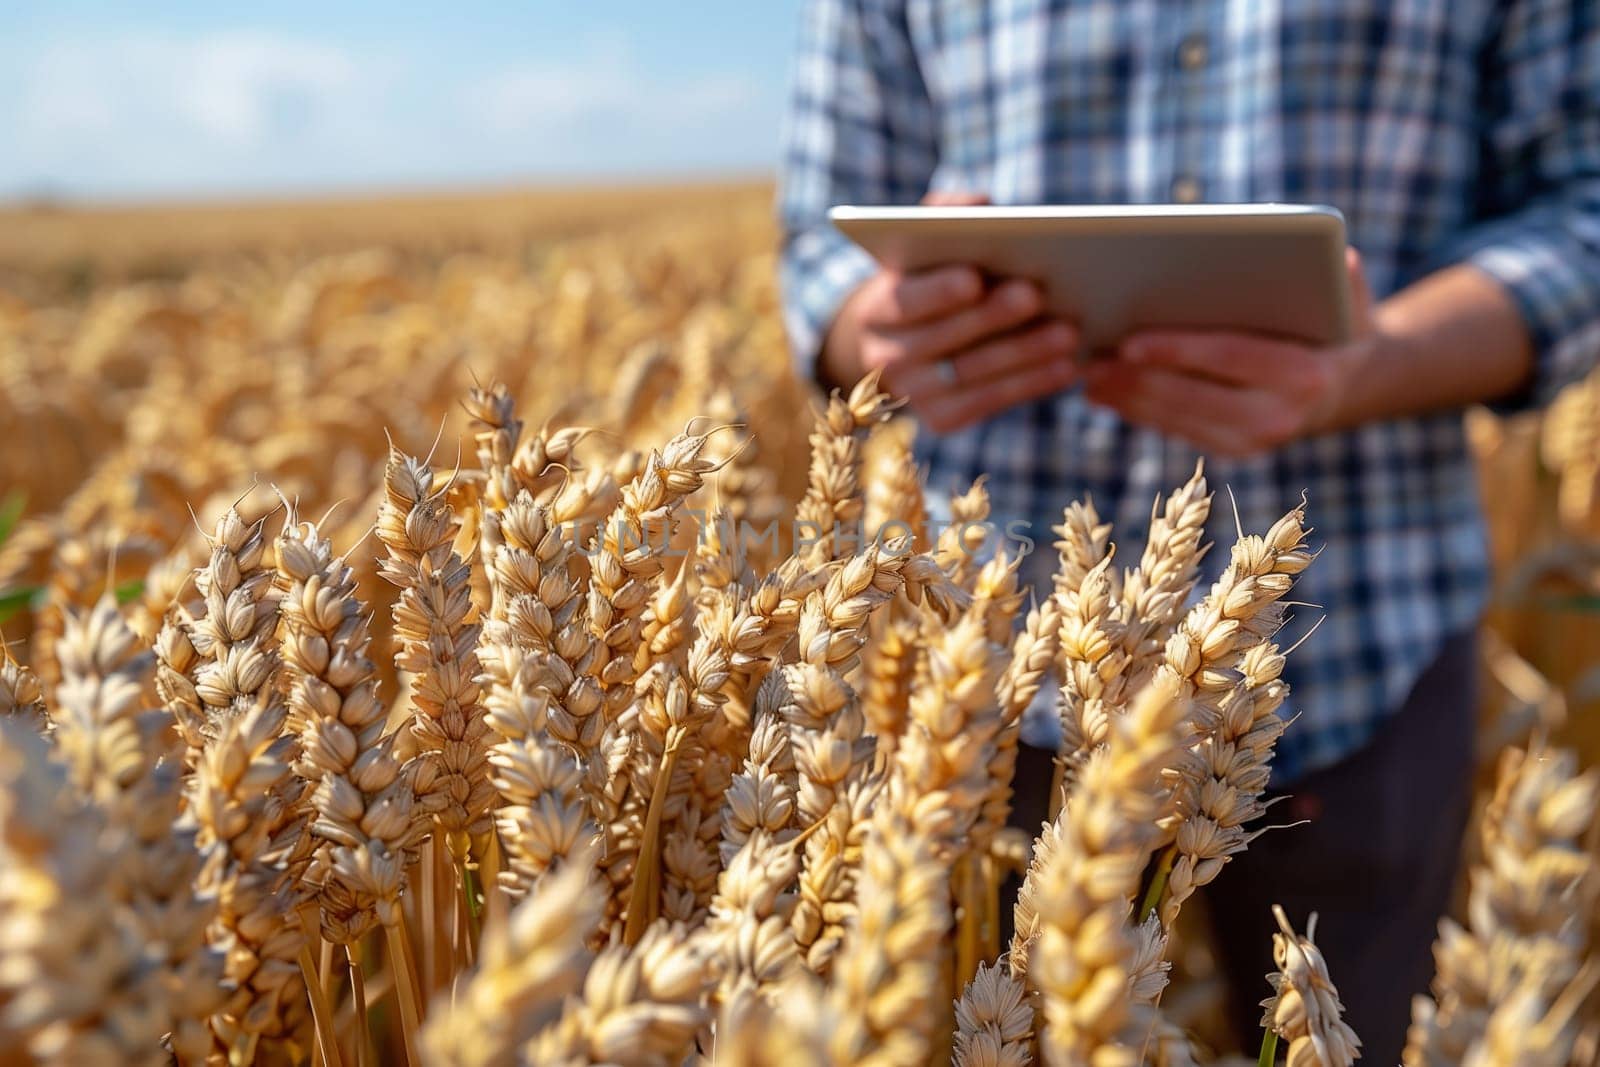 A man is standing in a field of wheat, holding a tablet. The wheat plants sway in the breeze under a blue sky, creating a picturesque scene of adaptation and communication device use in agriculture